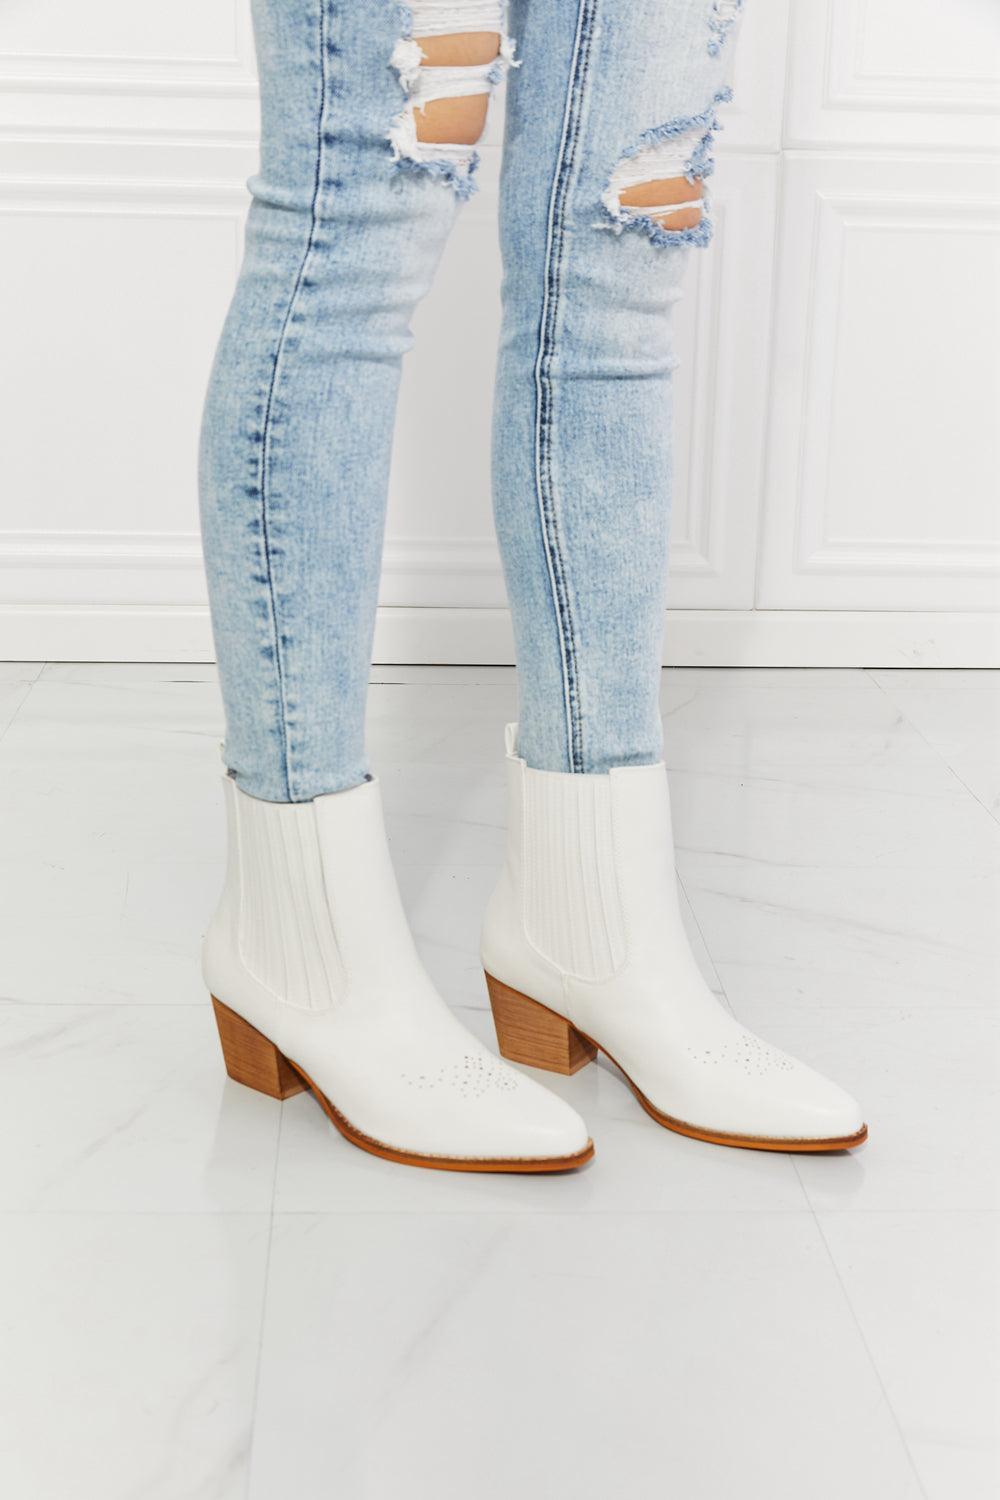 MMShoes Stacked Heel White Chelsea Boots - MXSTUDIO.COM